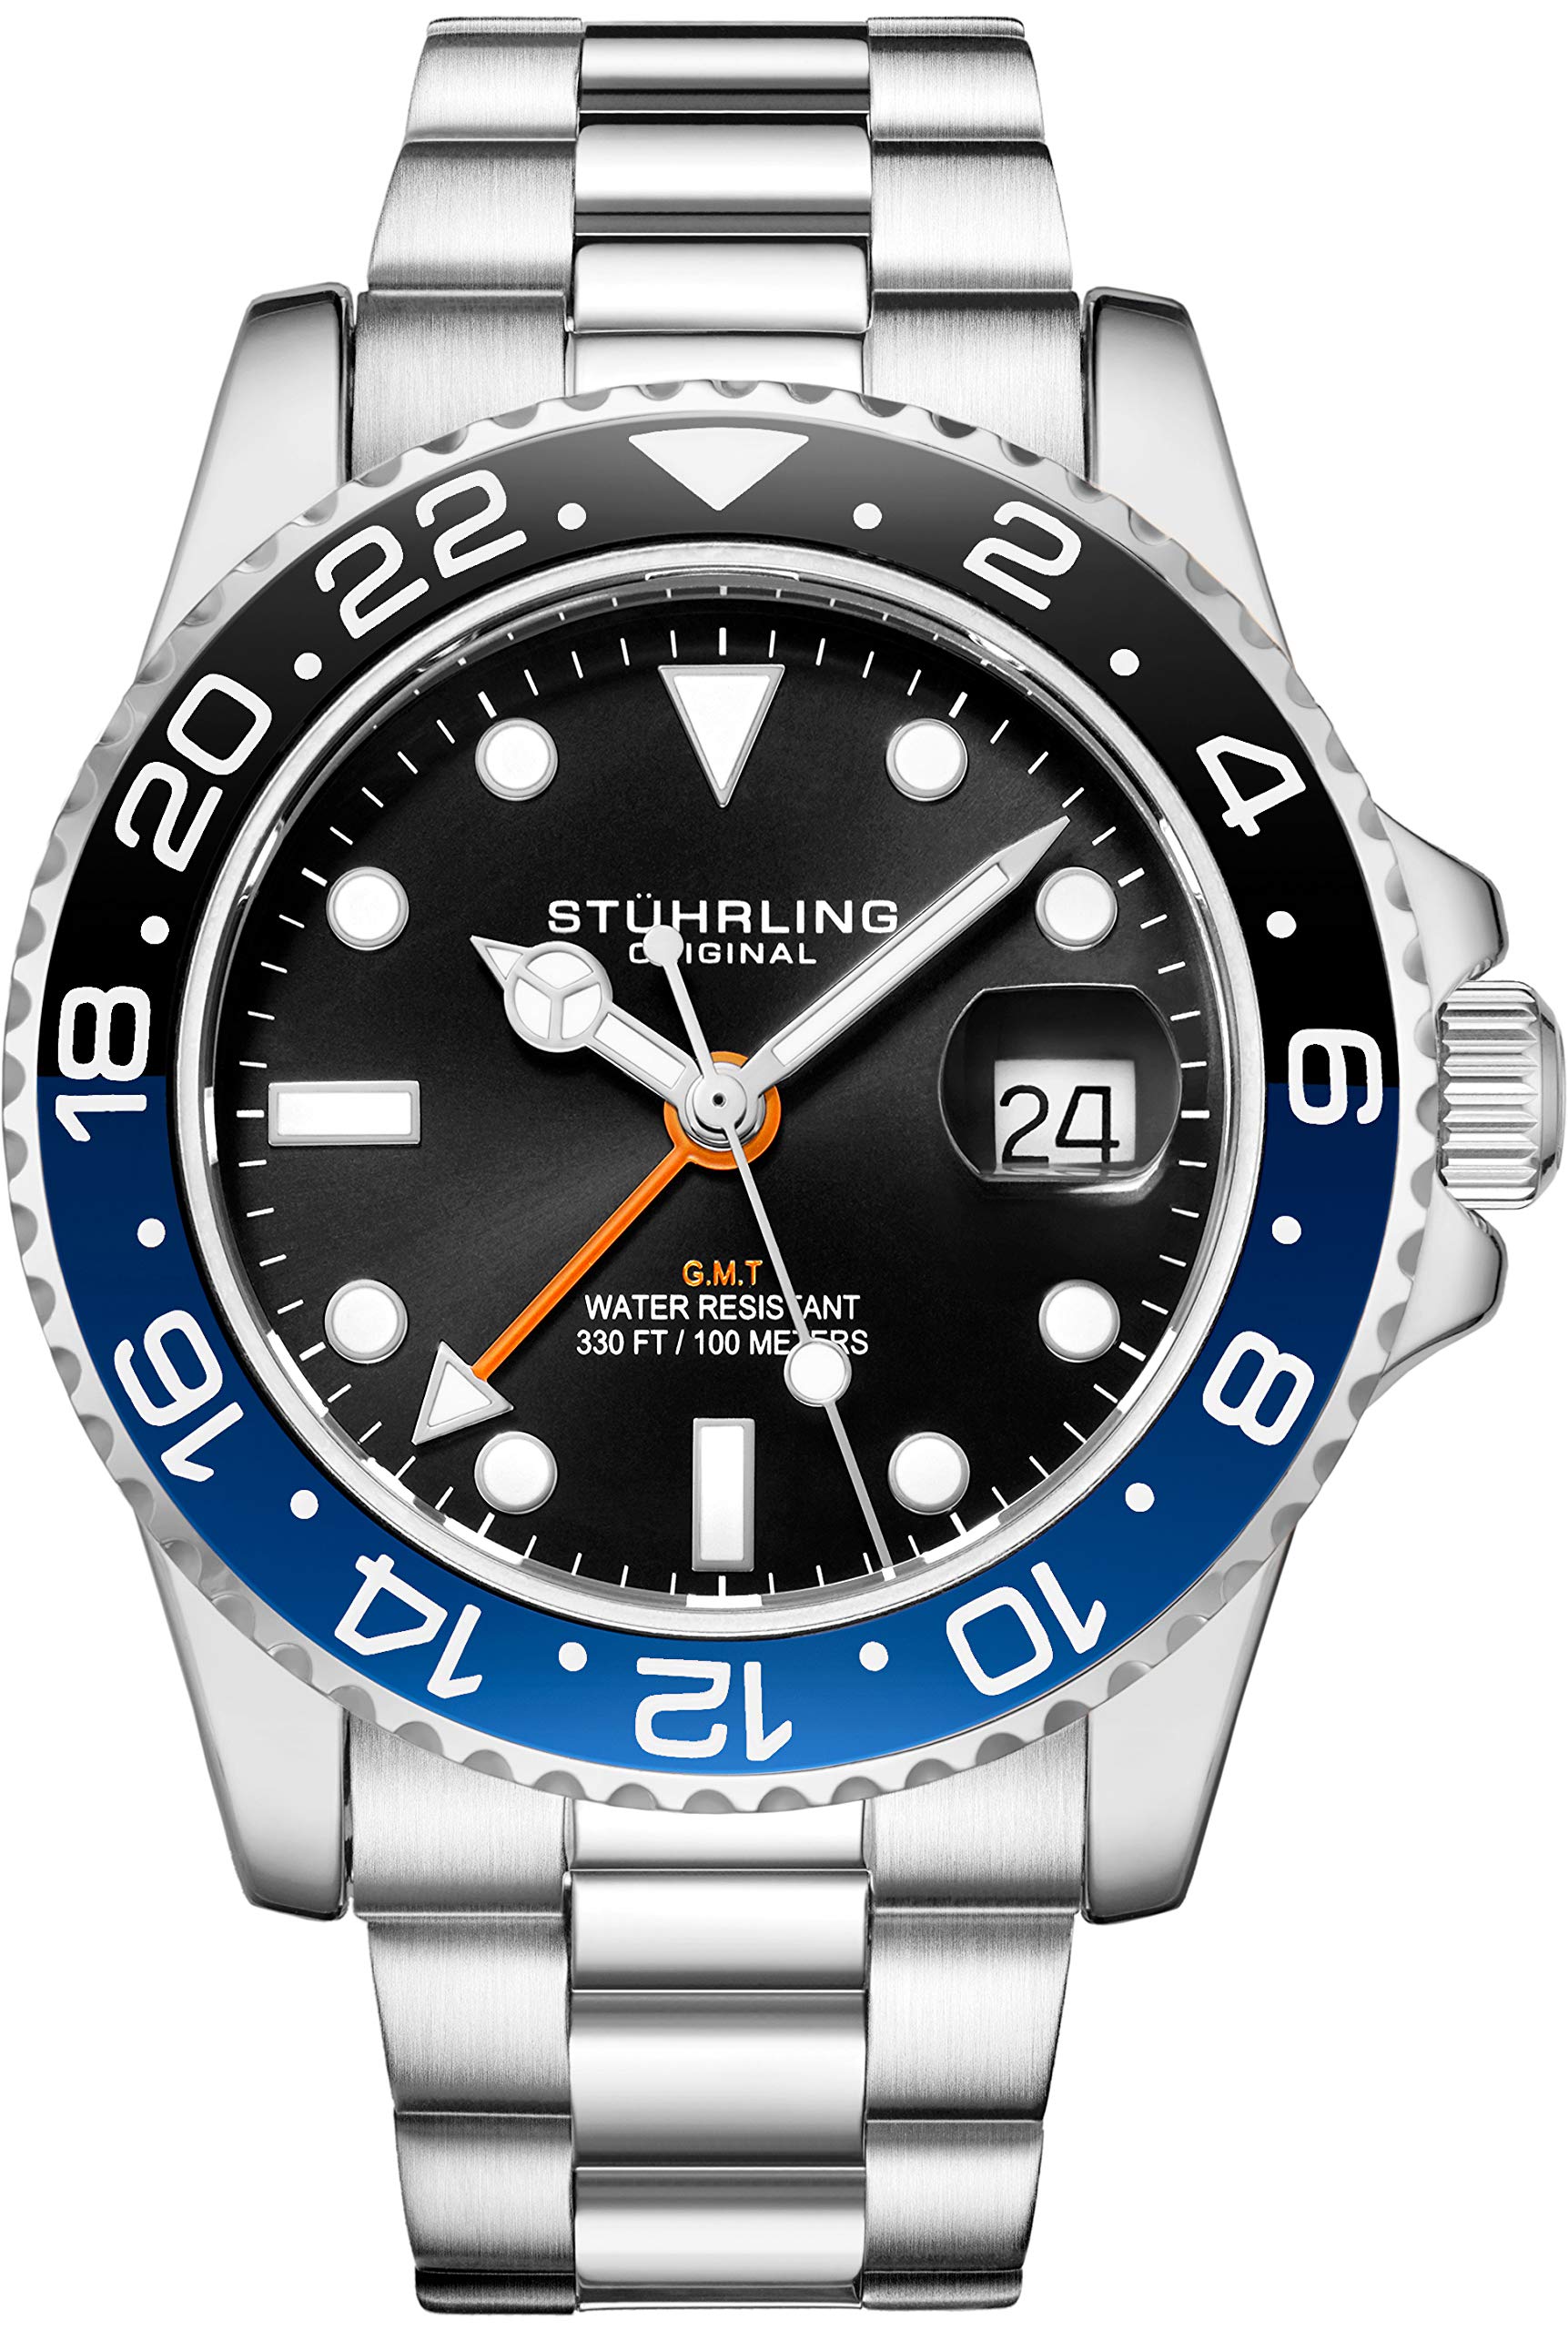 Stuhrling Original Men's Stainless Steel Triple Row Bracelet GMT Watch Quartz Dual Time, Quickset Date with Screw Down Crown Water Resistant up to 10 ATM